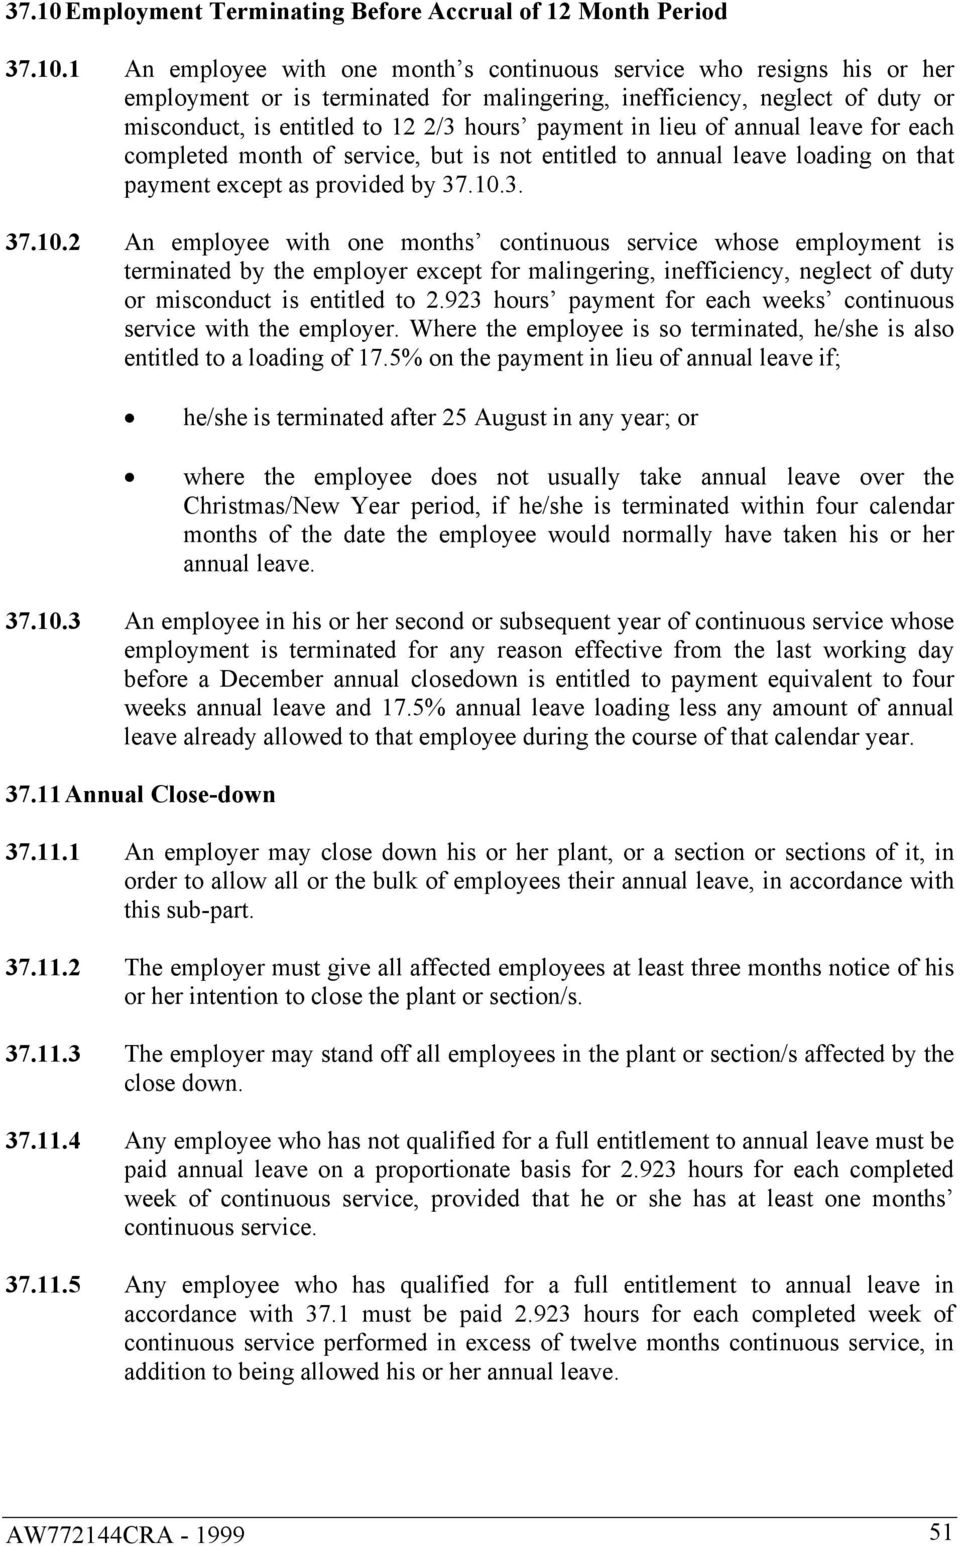 1 An employee with one month s continuous service who resigns his or her employment or is terminated for malingering, inefficiency, neglect of duty or misconduct, is entitled to 12 2/3 hours payment